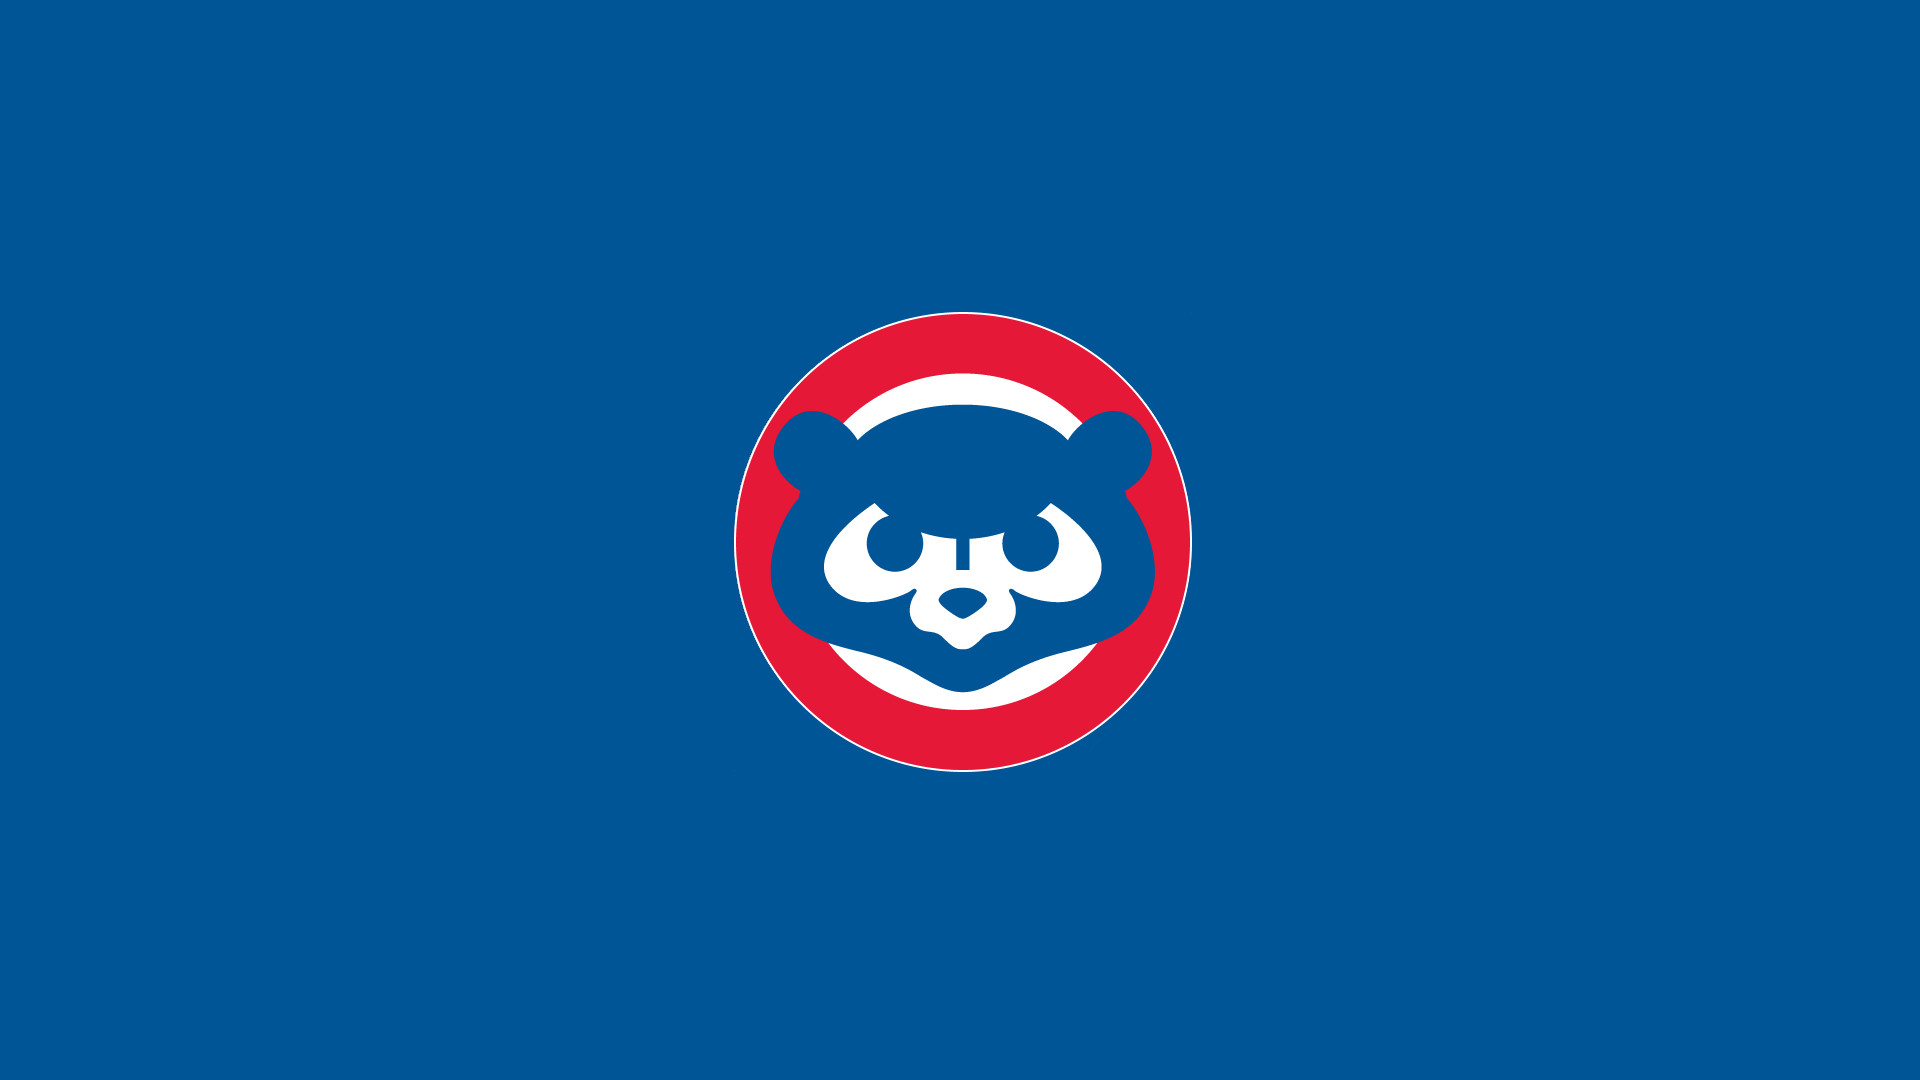 1920x1080 Chicago Cubs Phone | Chicago Cubs Phone Images, Pictures, Wallpapers on  NMgnCP.com